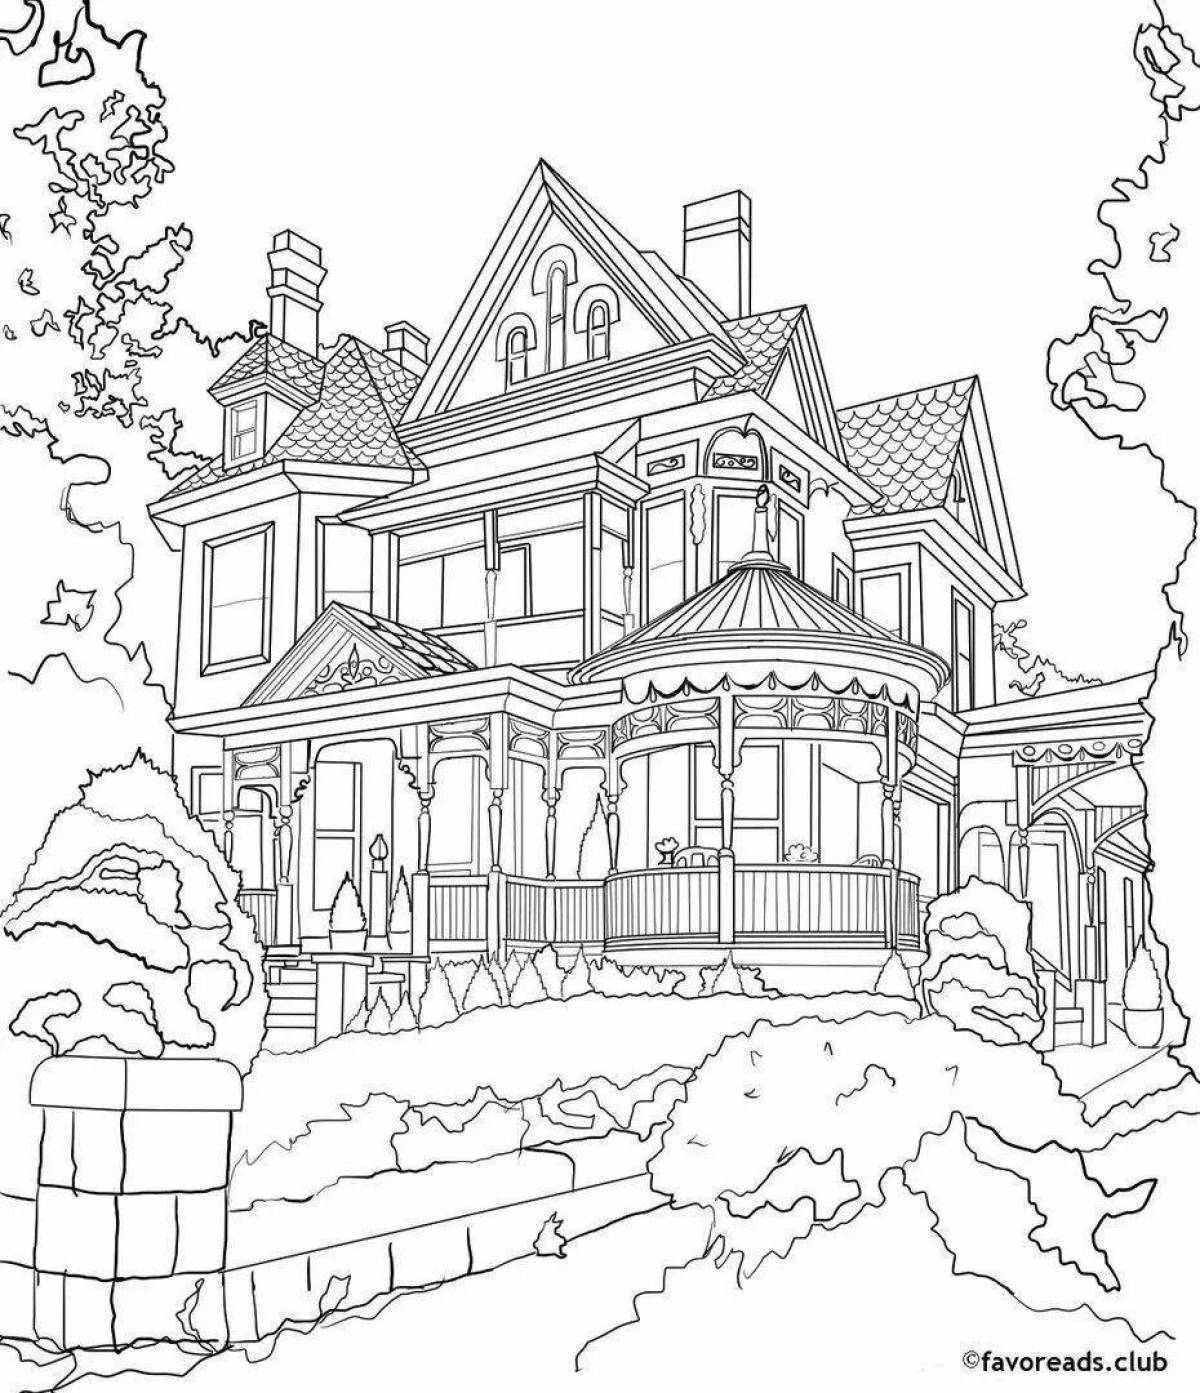 Coloring page tranquil villa